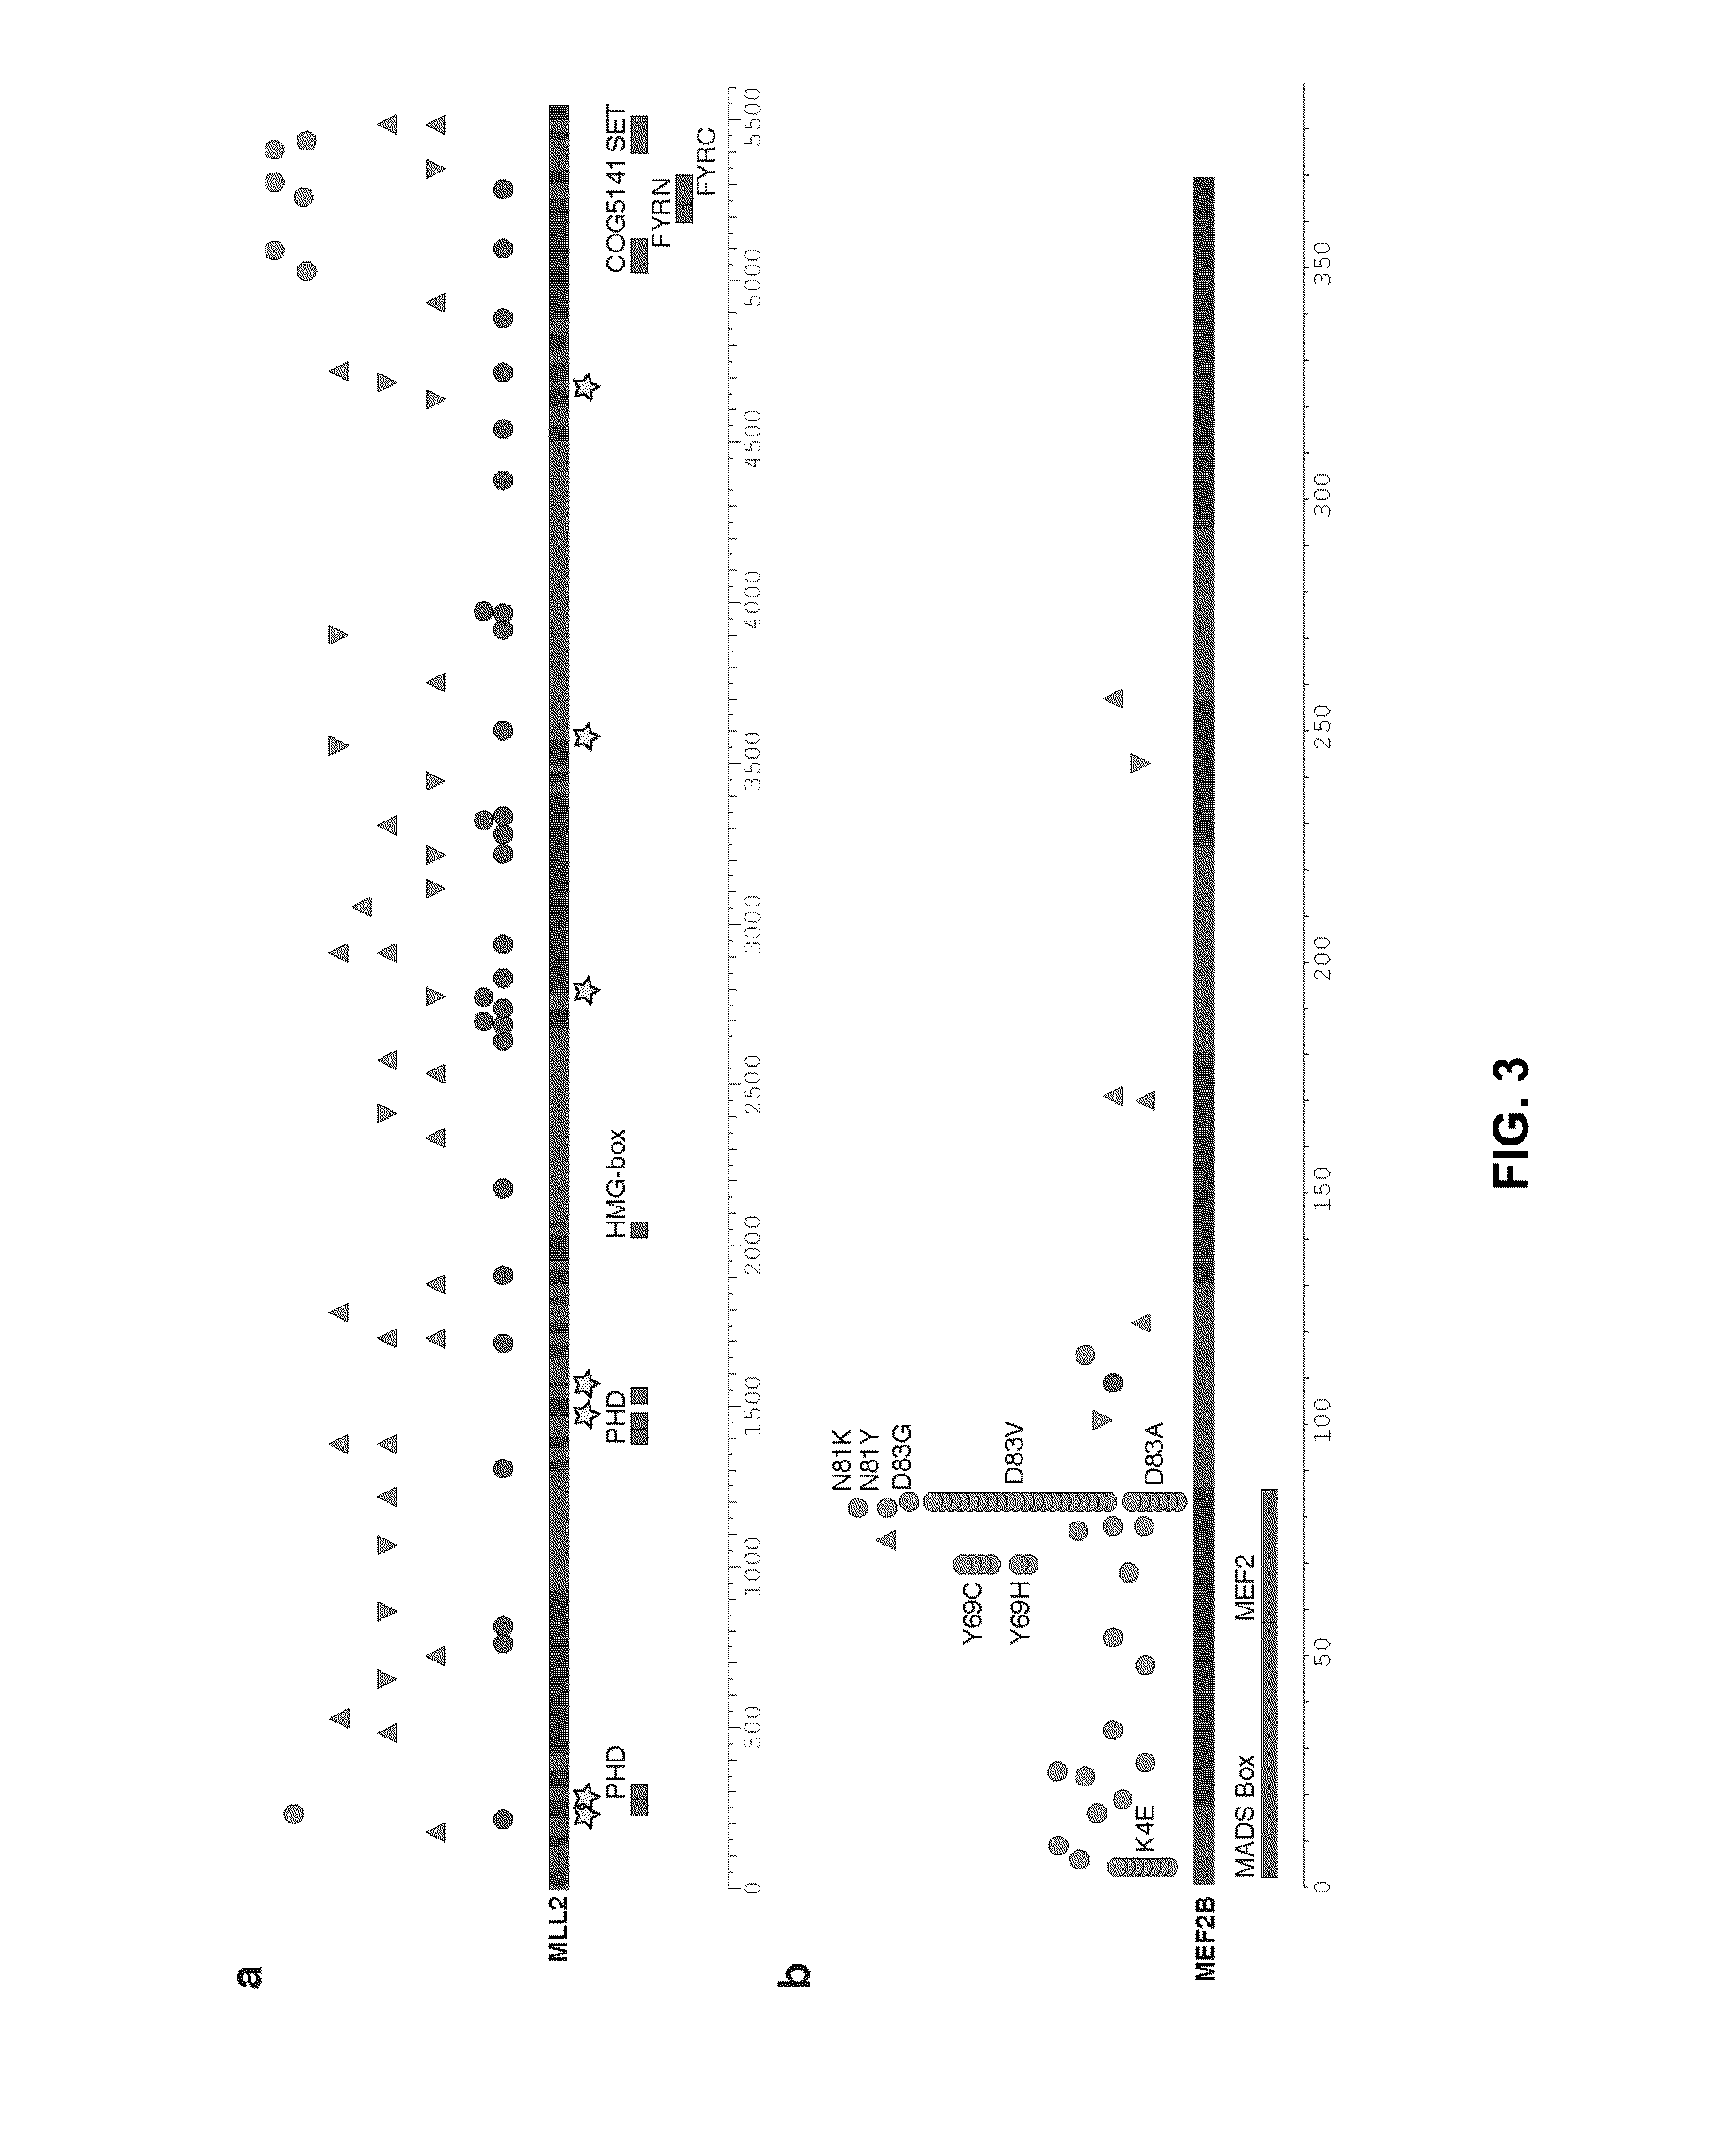 Biomarkers for Non-Hodgkin Lymphomas and Uses Thereof